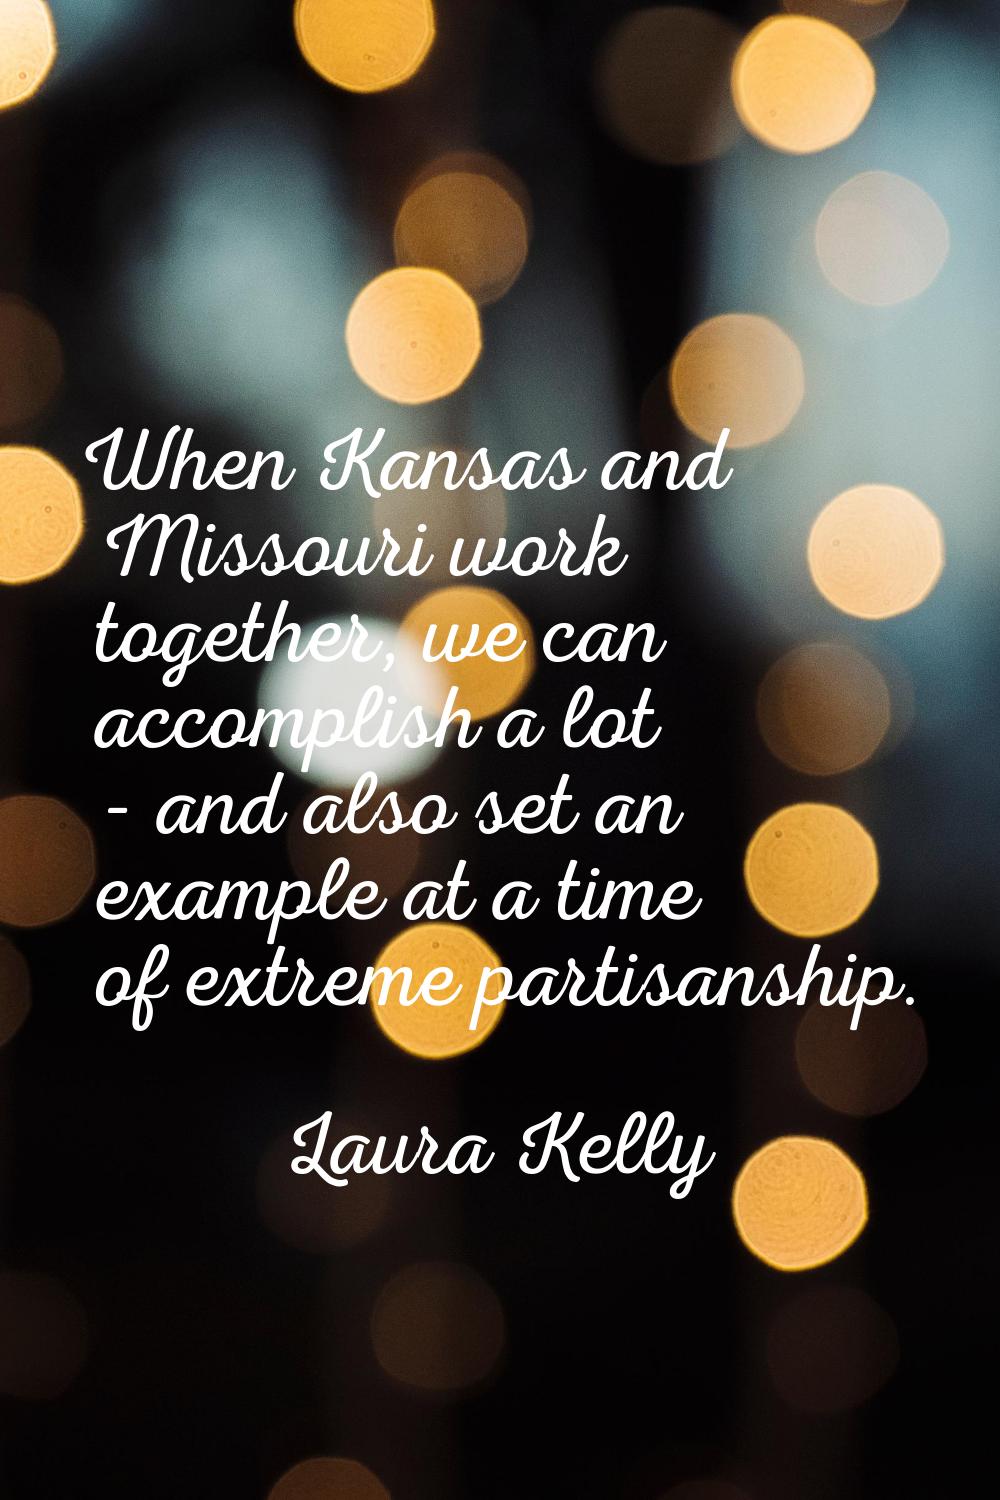 When Kansas and Missouri work together, we can accomplish a lot - and also set an example at a time